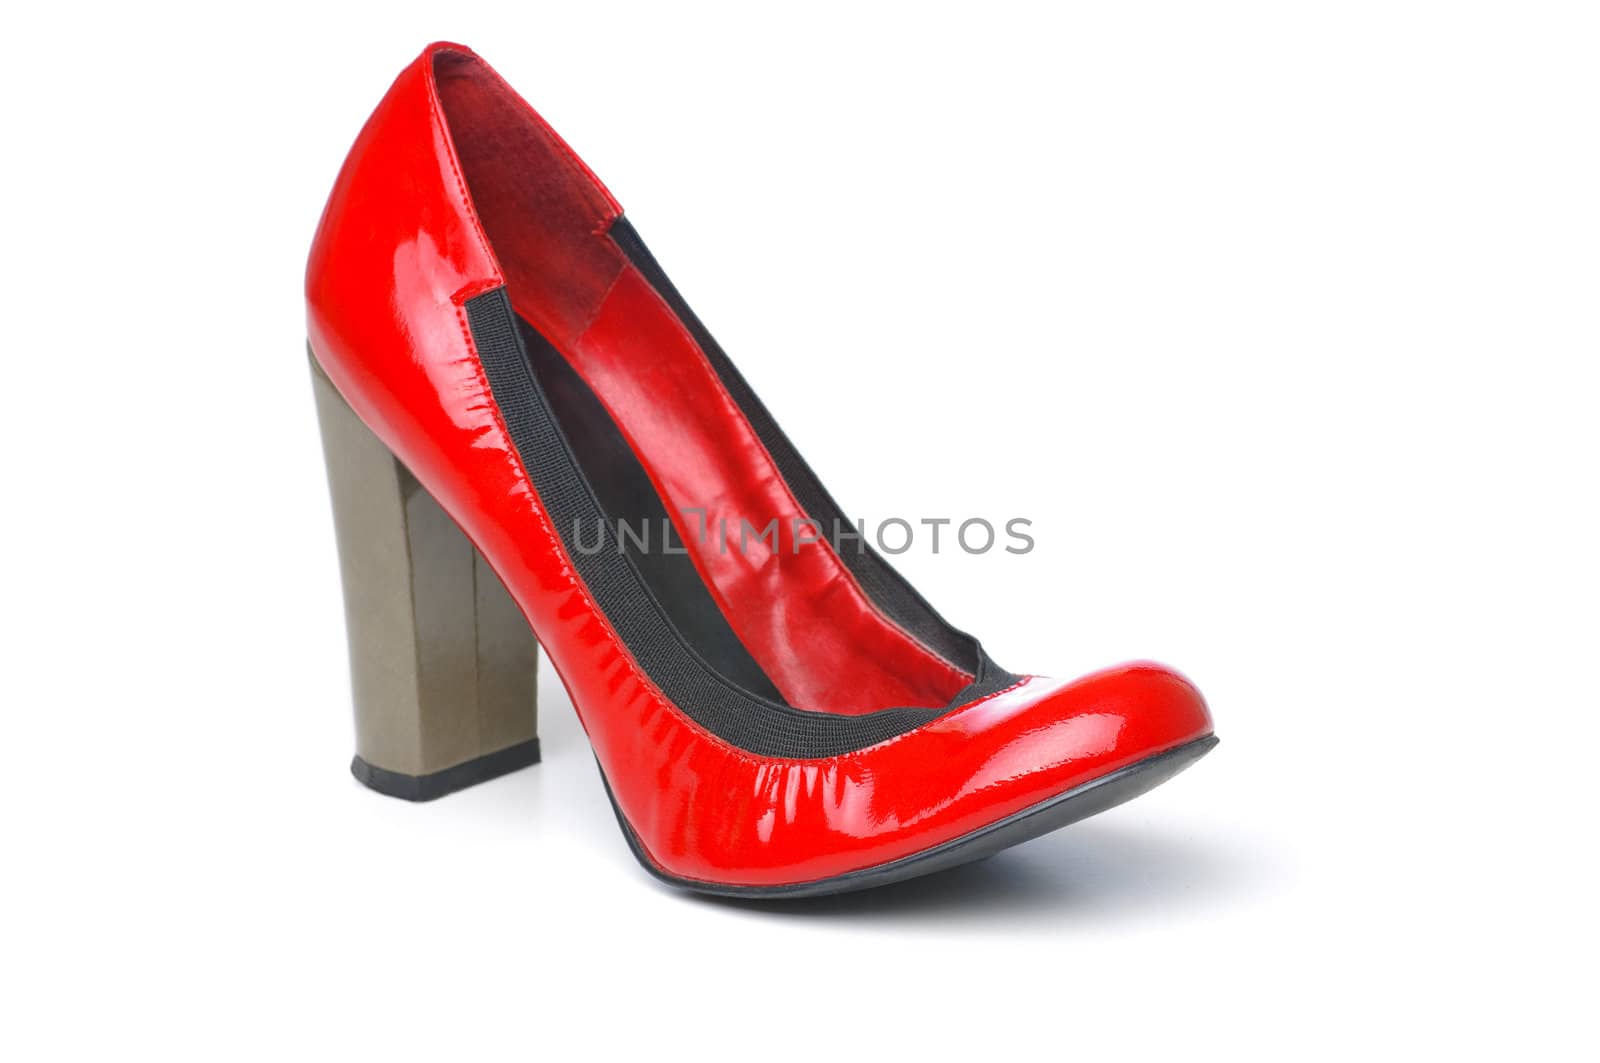 Single red pump. by Shane9